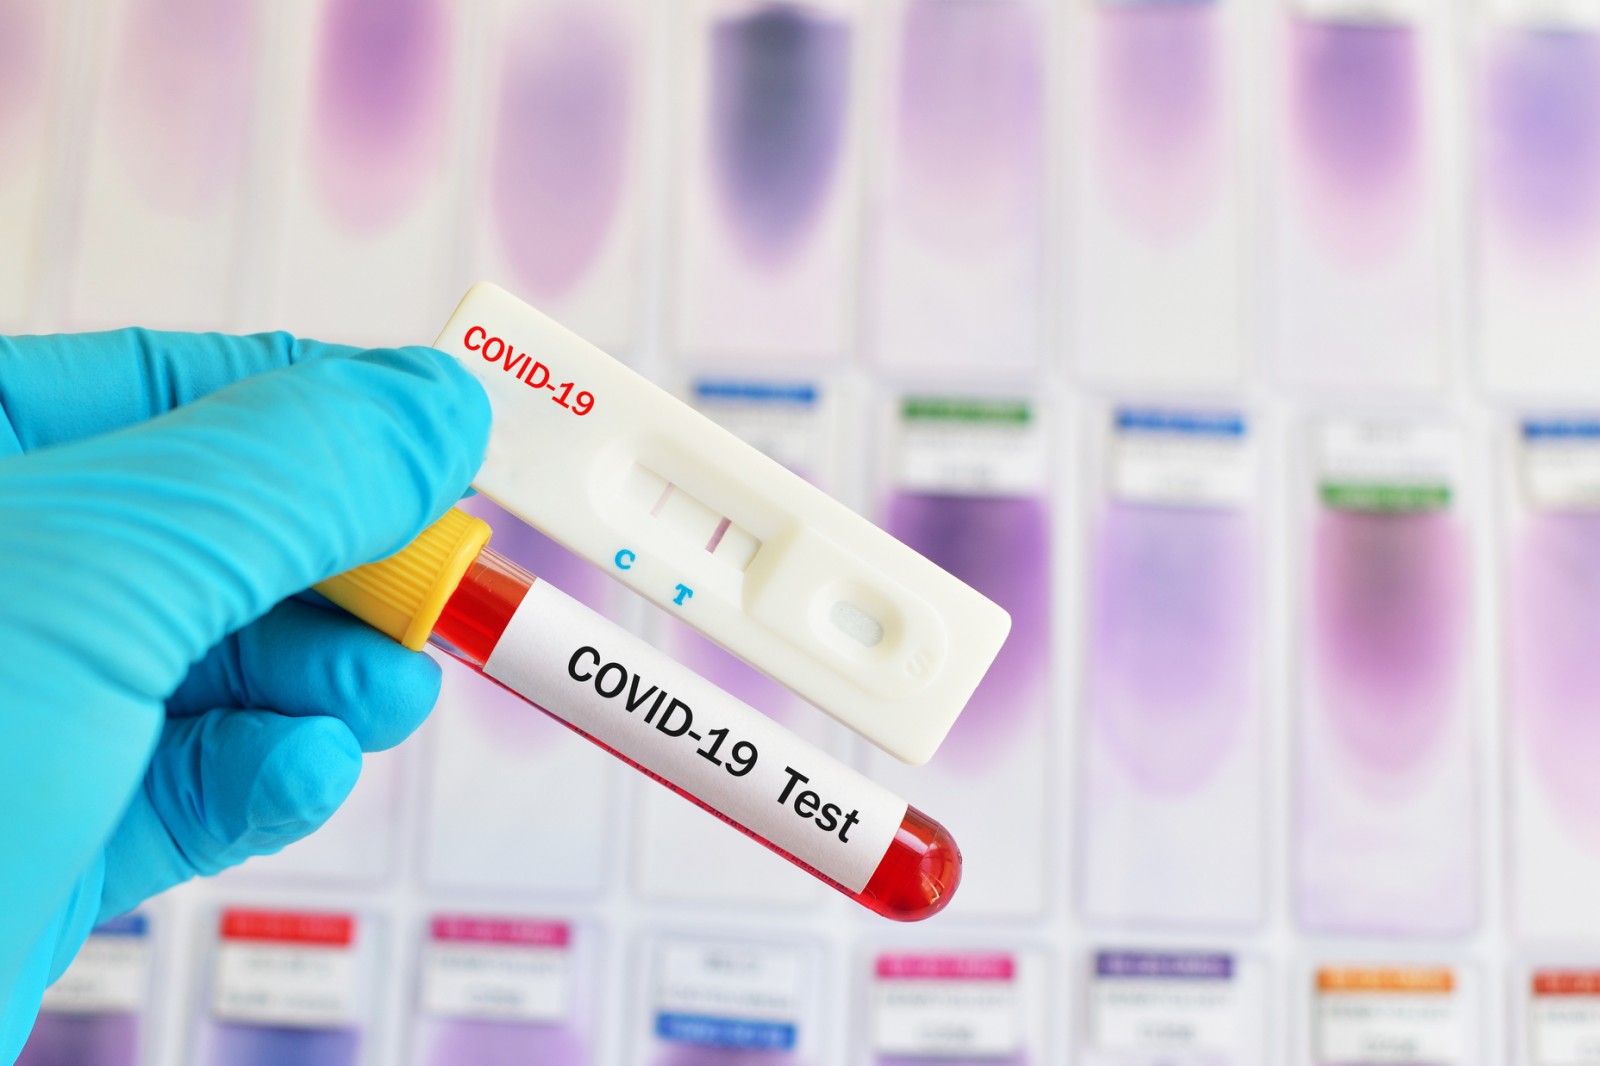 Top Covid News 2021: Tips To Boost Immune System, Humanitarian Response & Vaccine Milestone